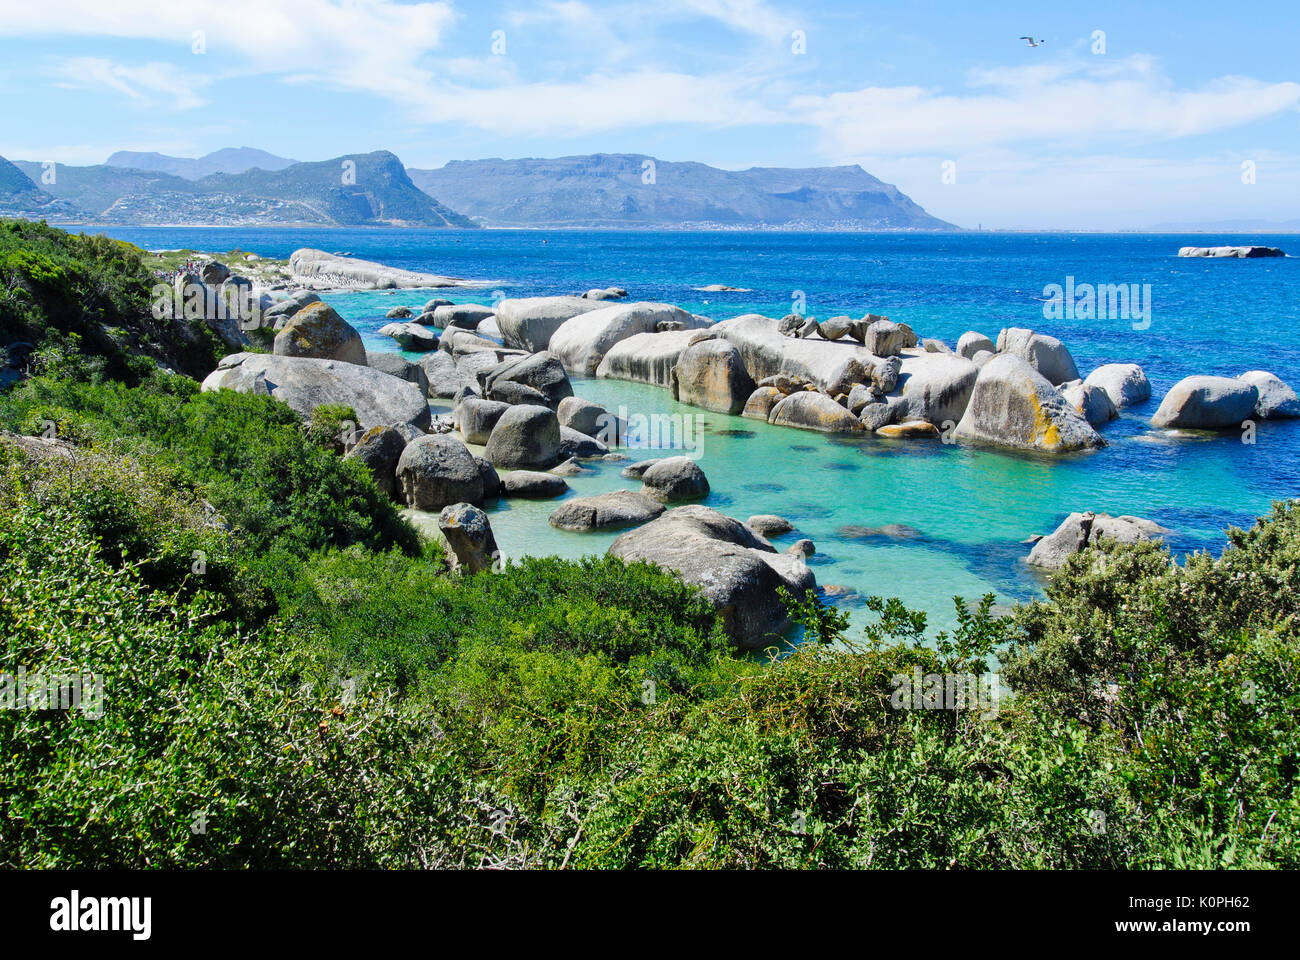 SCENIC VIEW OF BEAUTIFUL GRANITE BOULDERS ALONG BOULDER'S BEACH. PART OF TABLE MOUNTAIN NATIONAL PARK, SIMON'S TOWN, SOUTH AFRICA Stock Photo